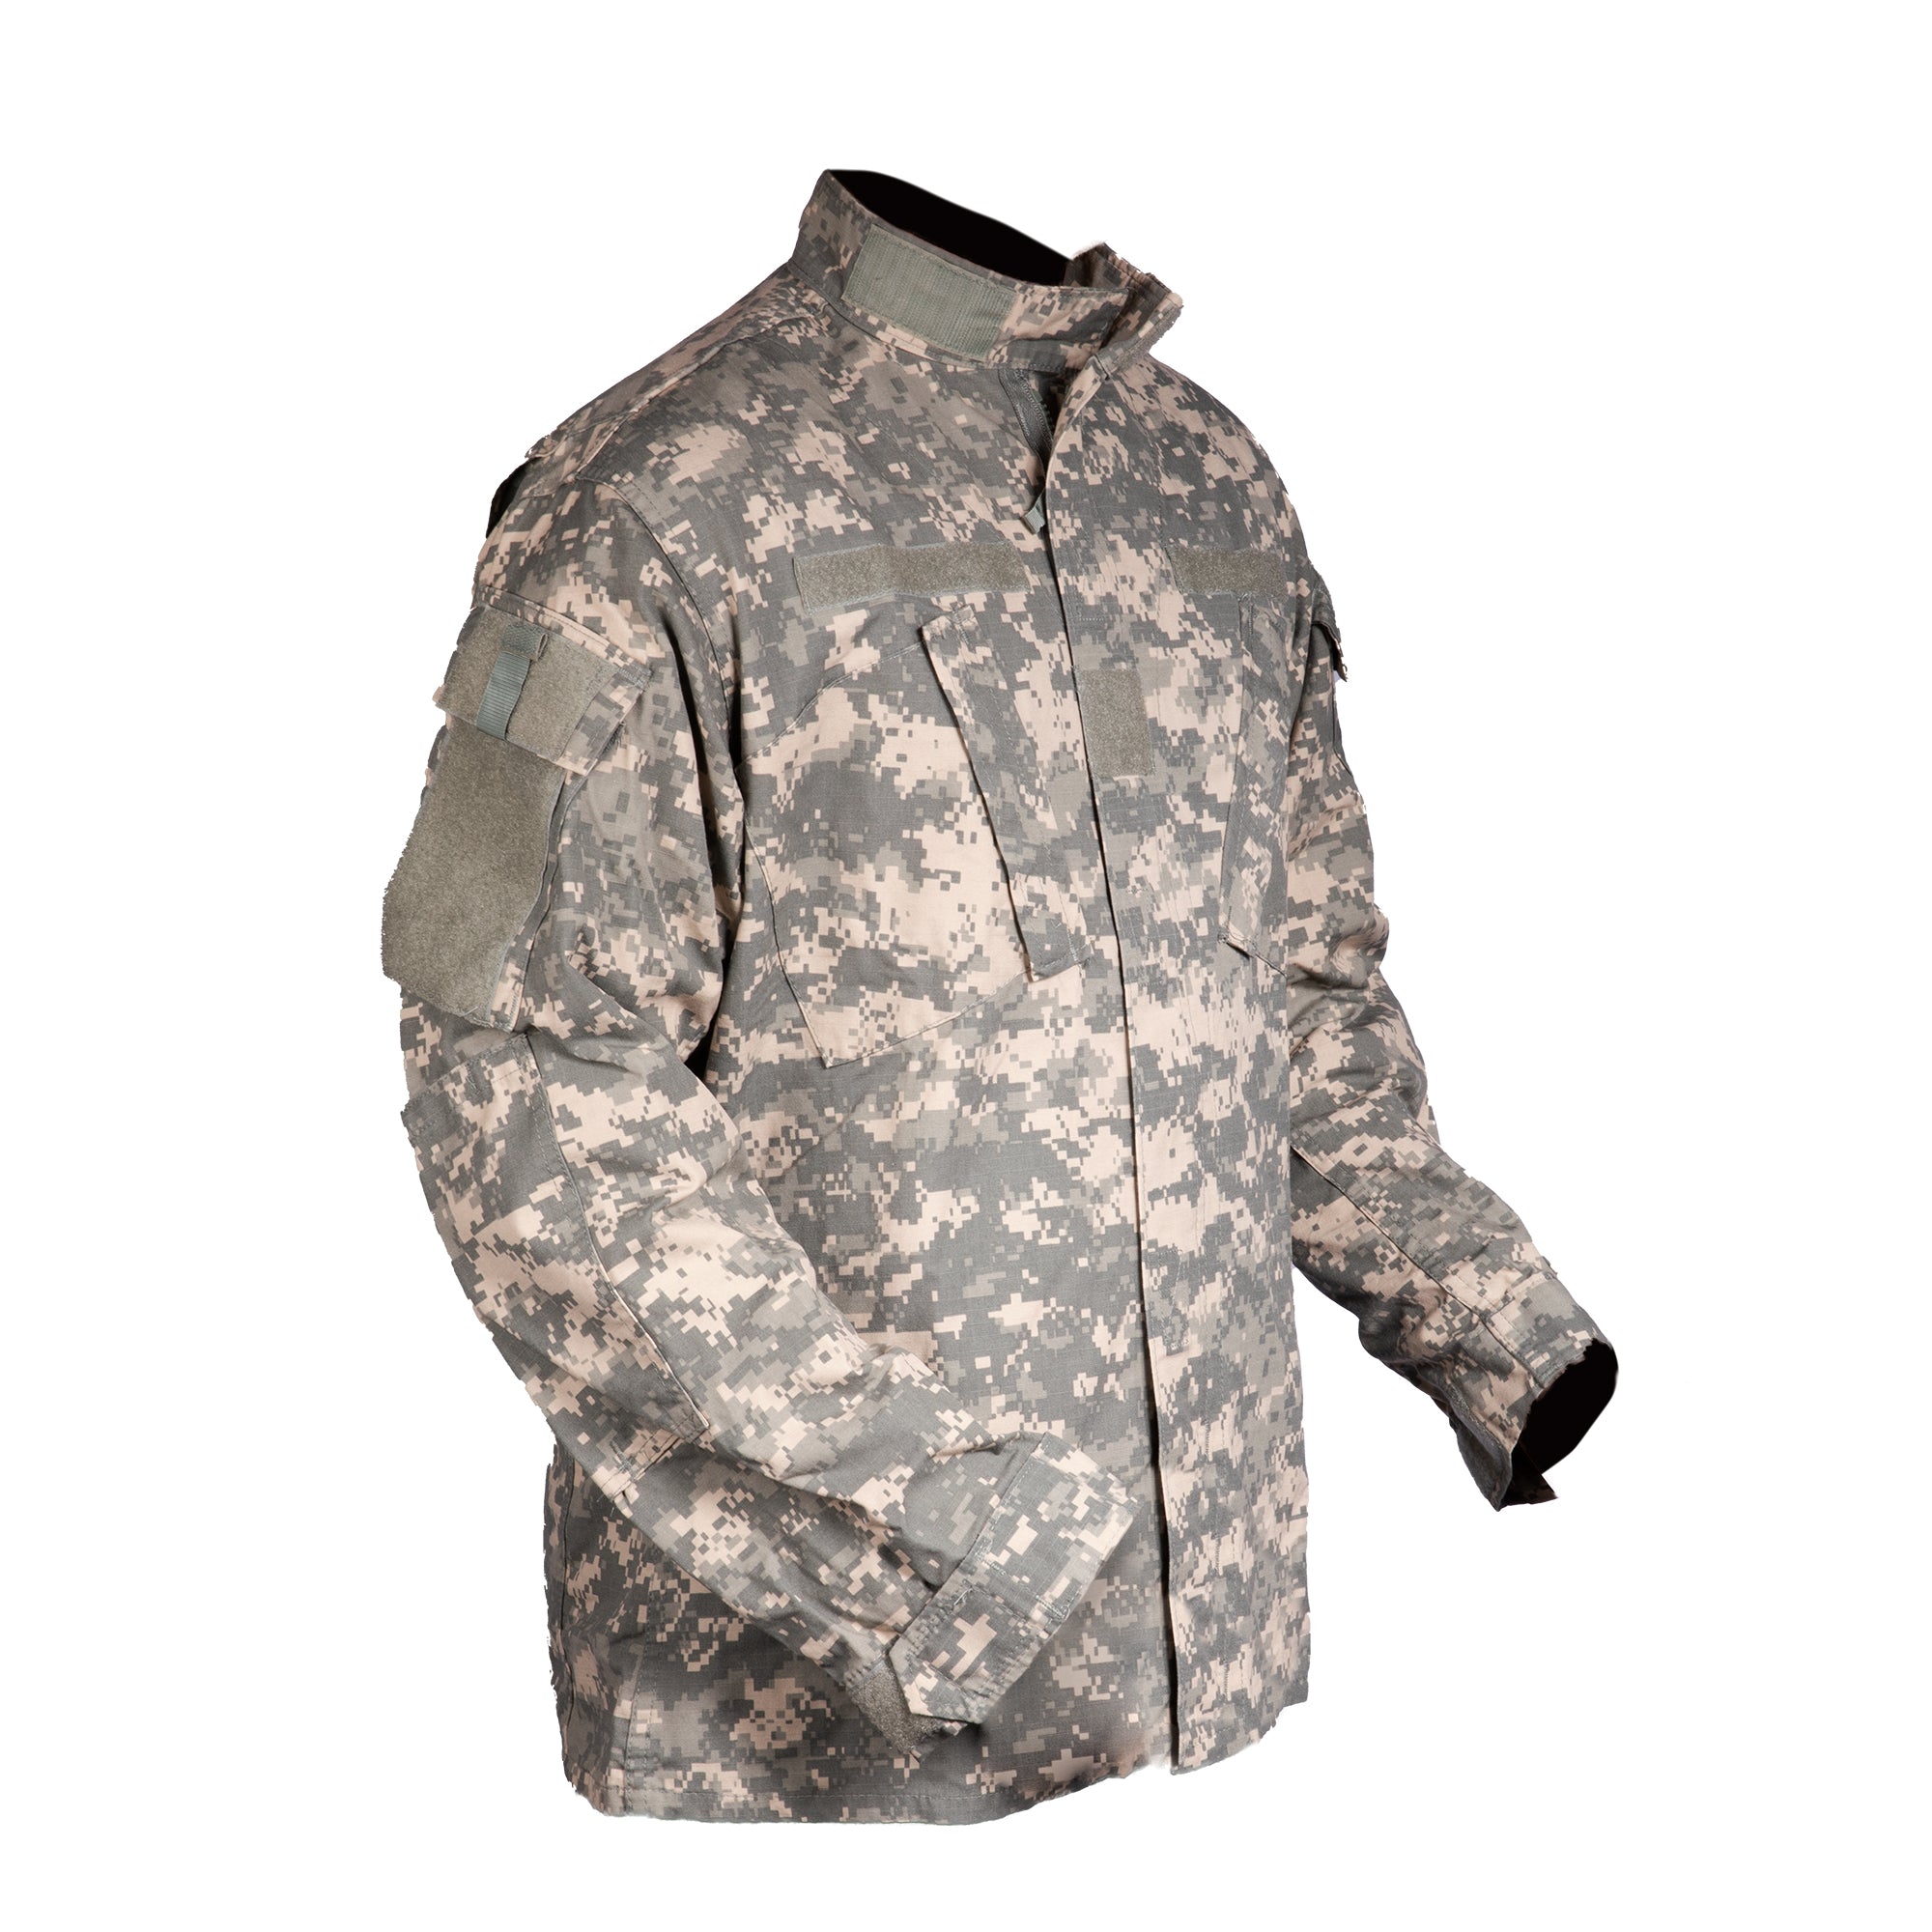 Acu American Army Military Suit Camouflage Night Camo Military